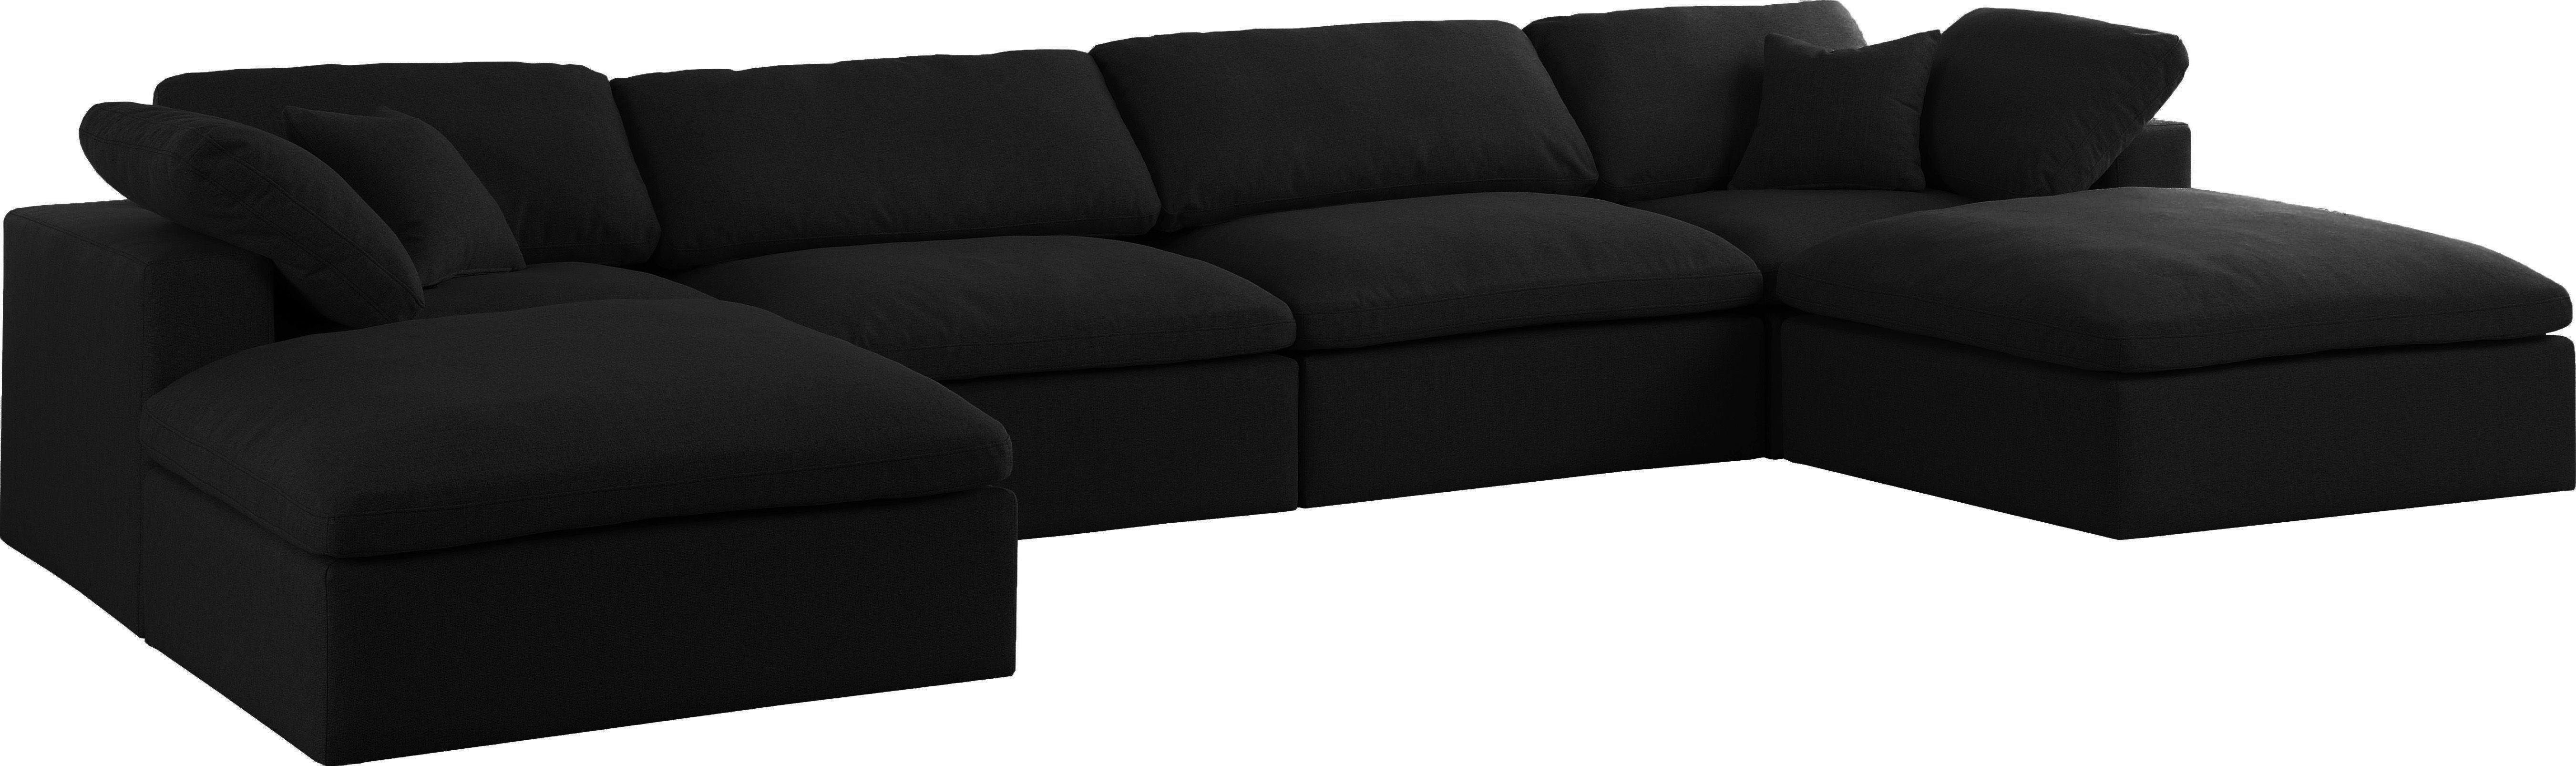 Meridian Furniture - Serene - Linen Textured Fabric Deluxe Comfort Modular Sectional 6 Piece - Black - Fabric - Modern & Contemporary - 5th Avenue Furniture